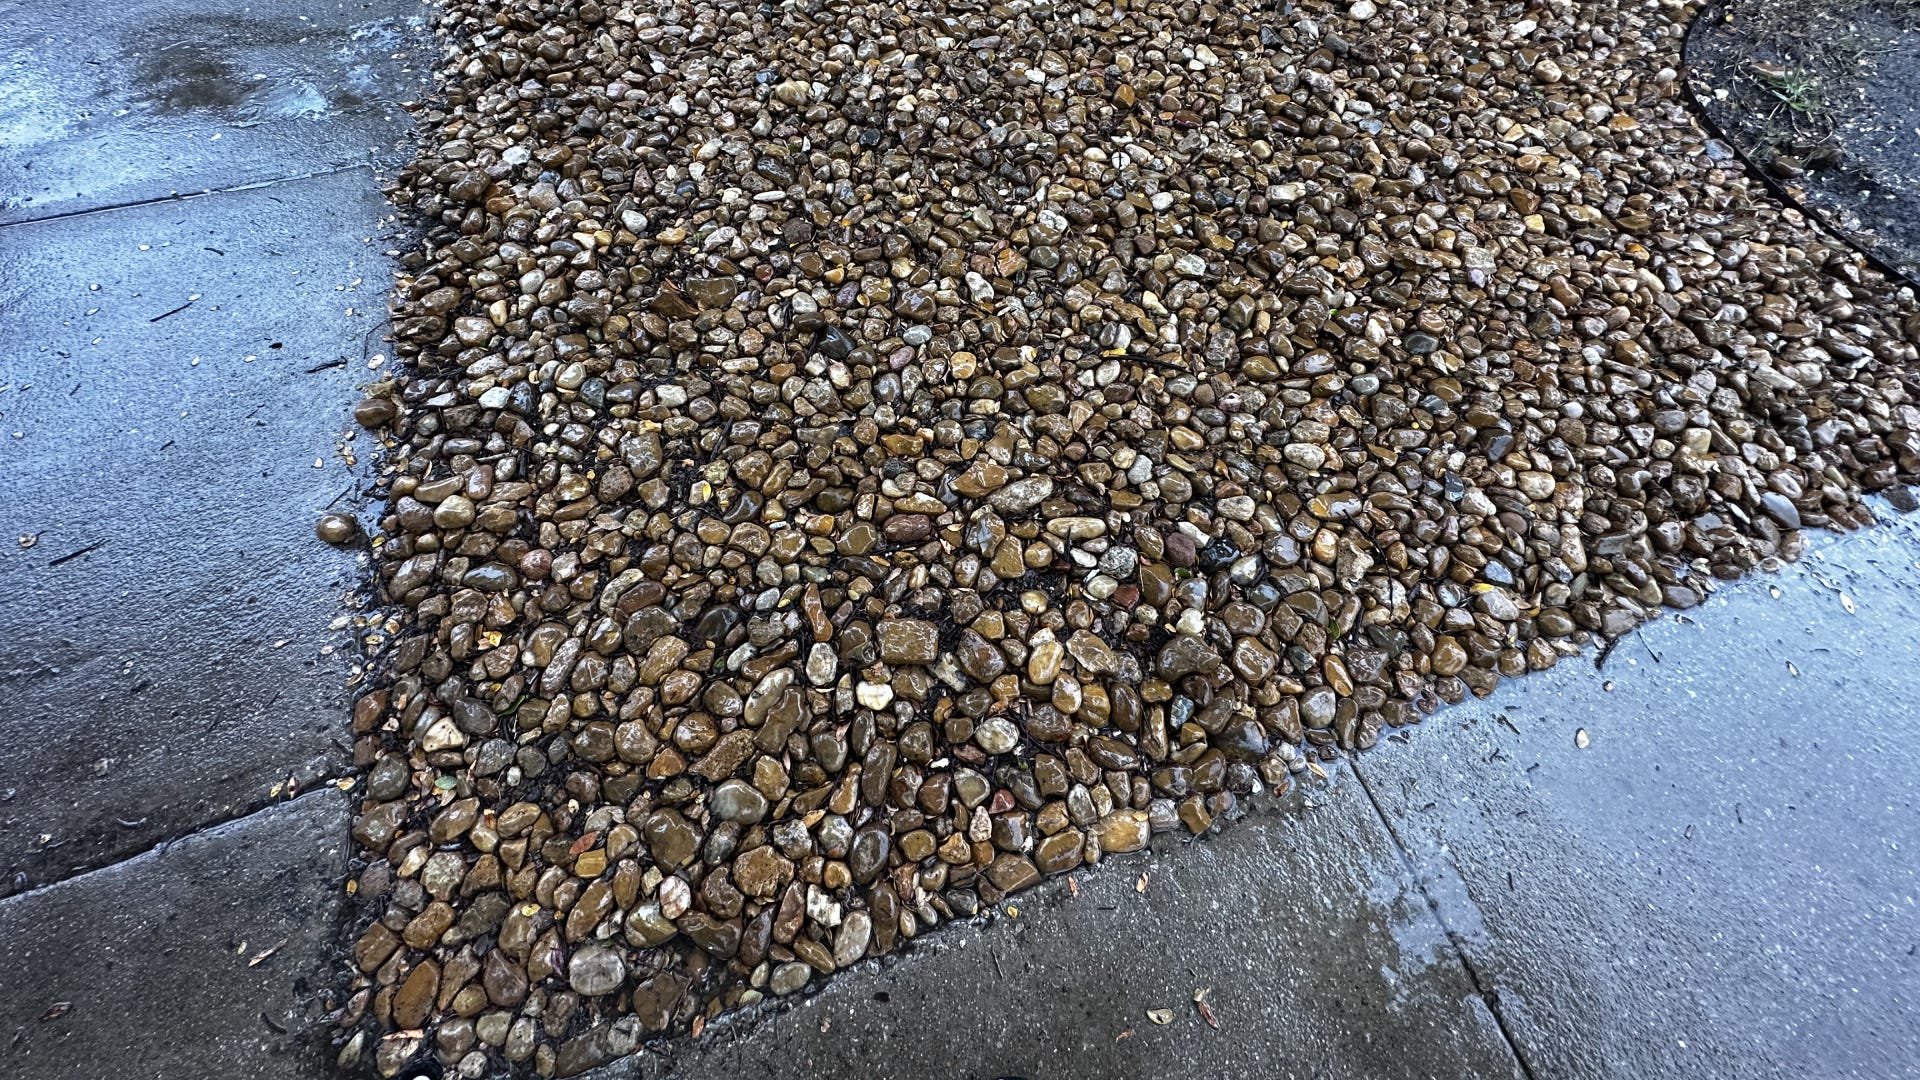 Freshly rained-on rocks with sidewalk on either side